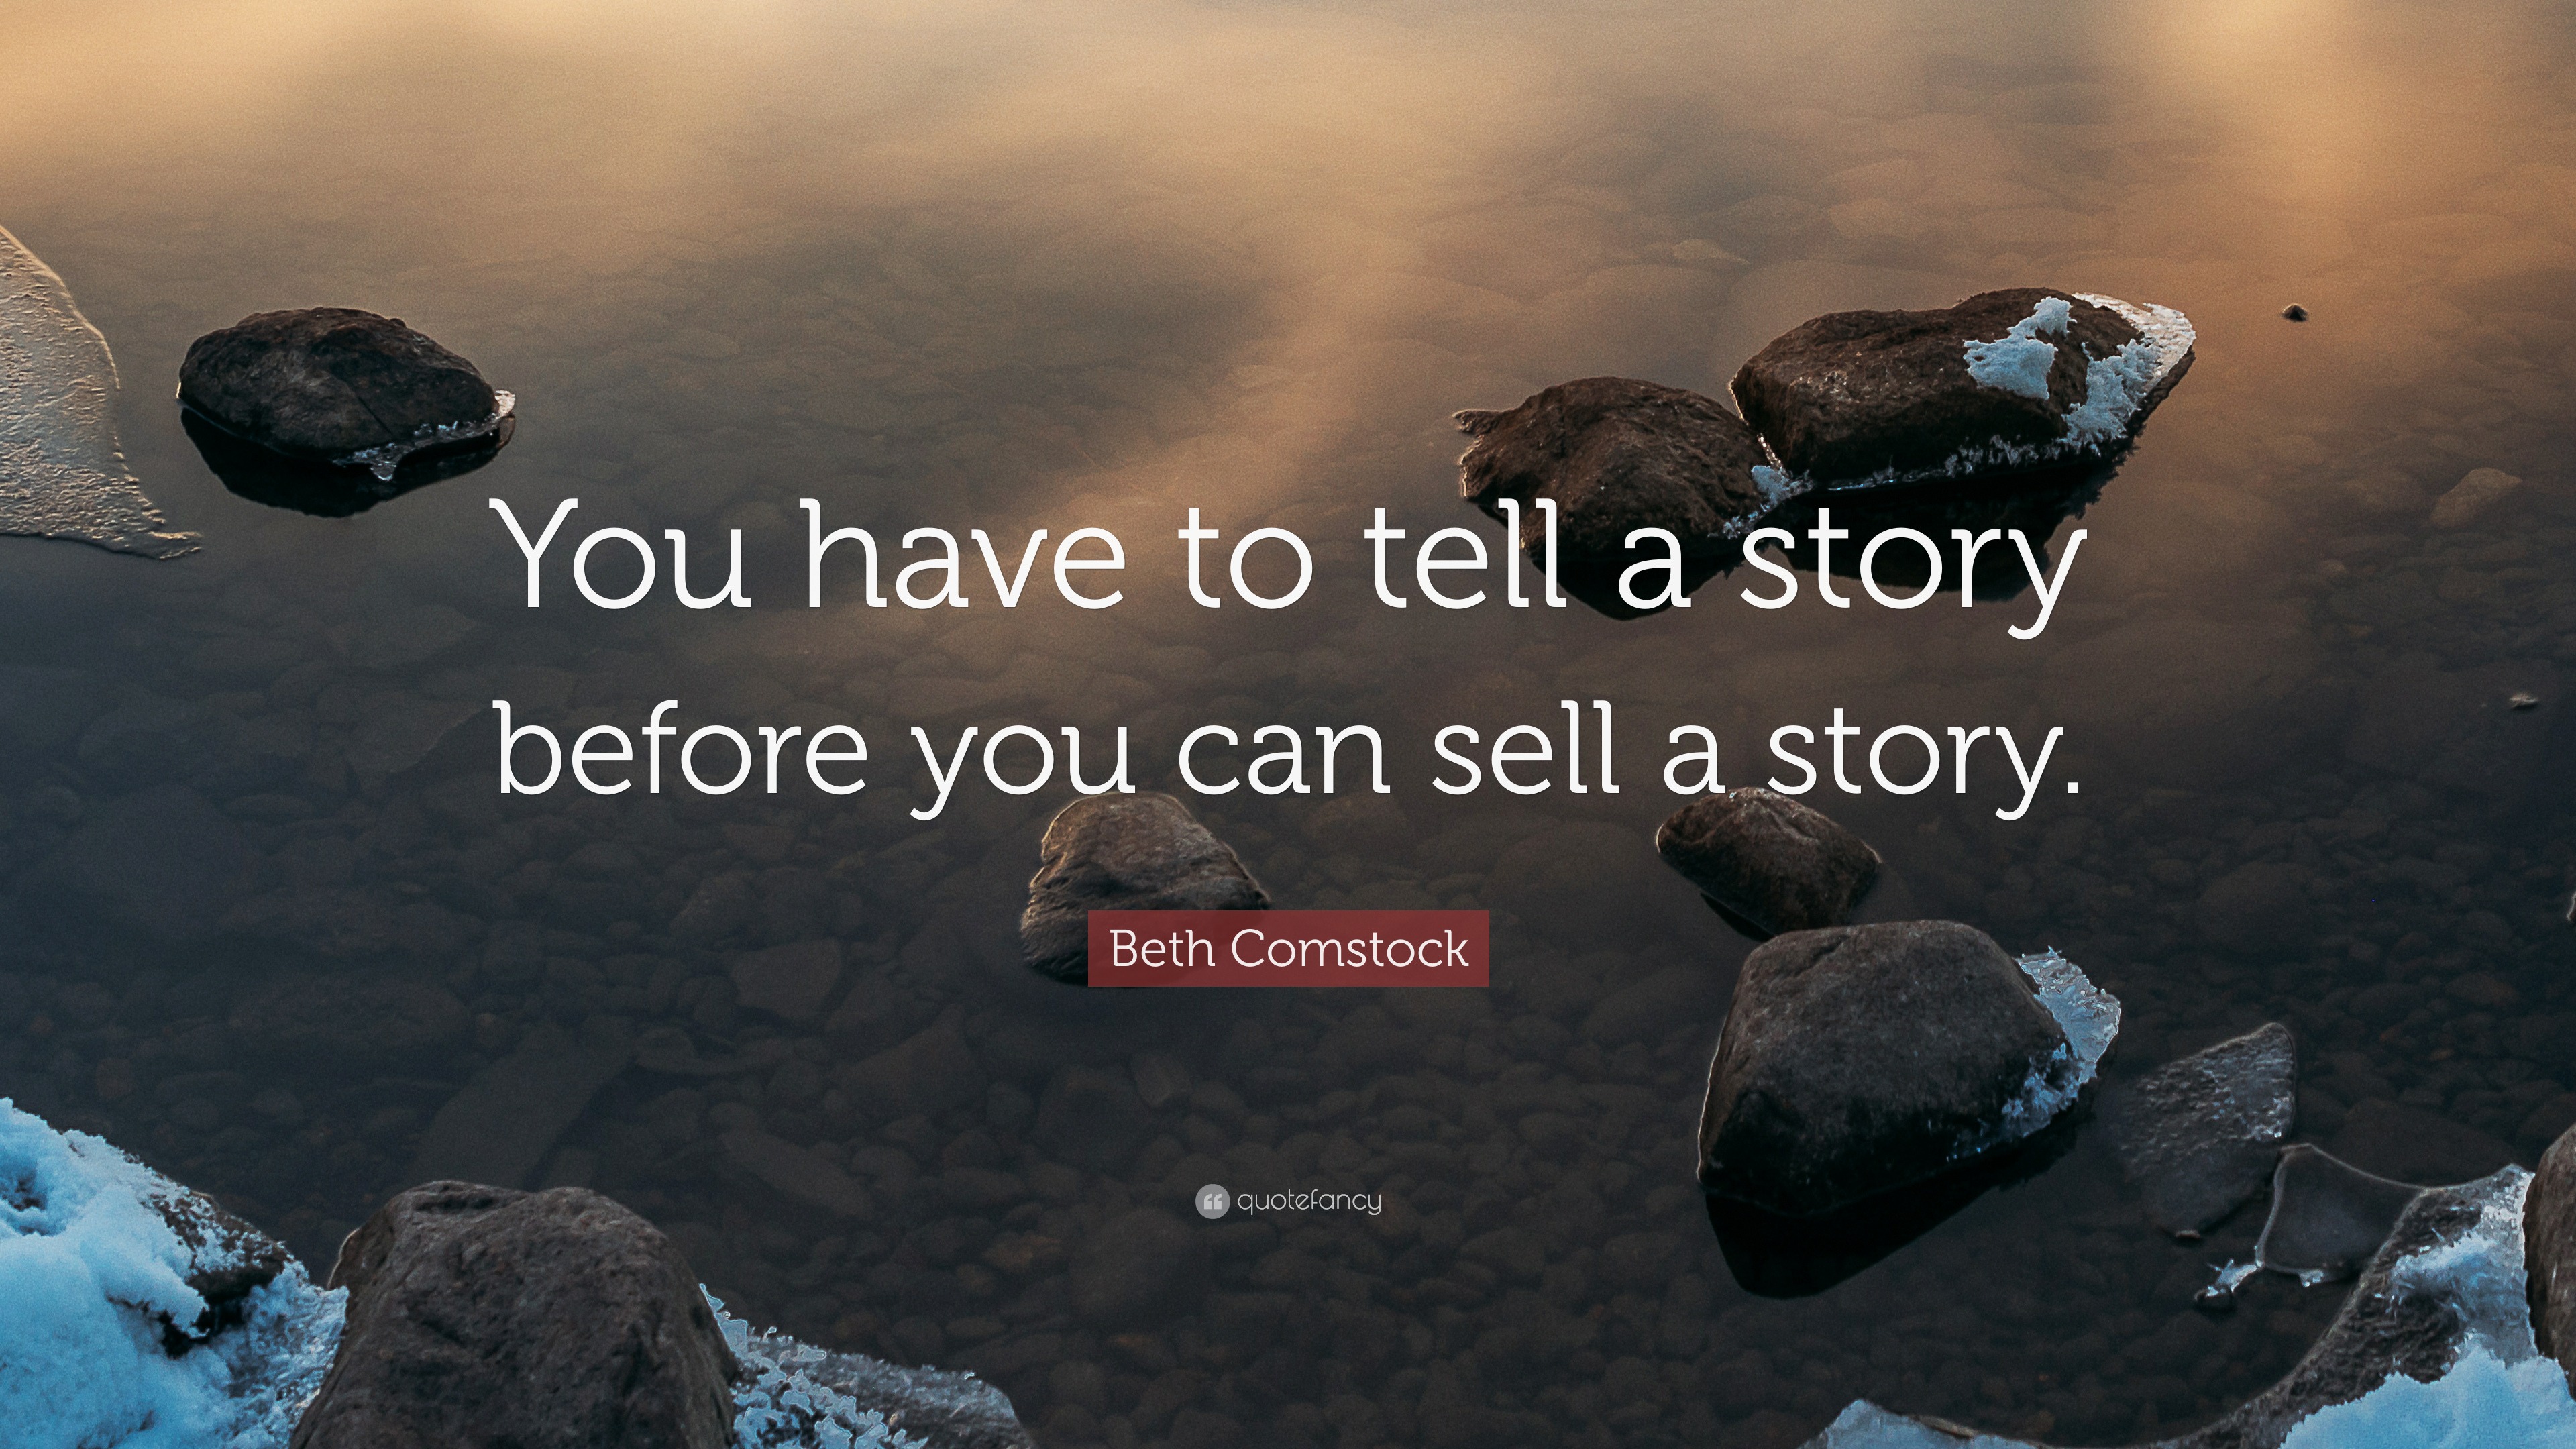 telling your story quotes